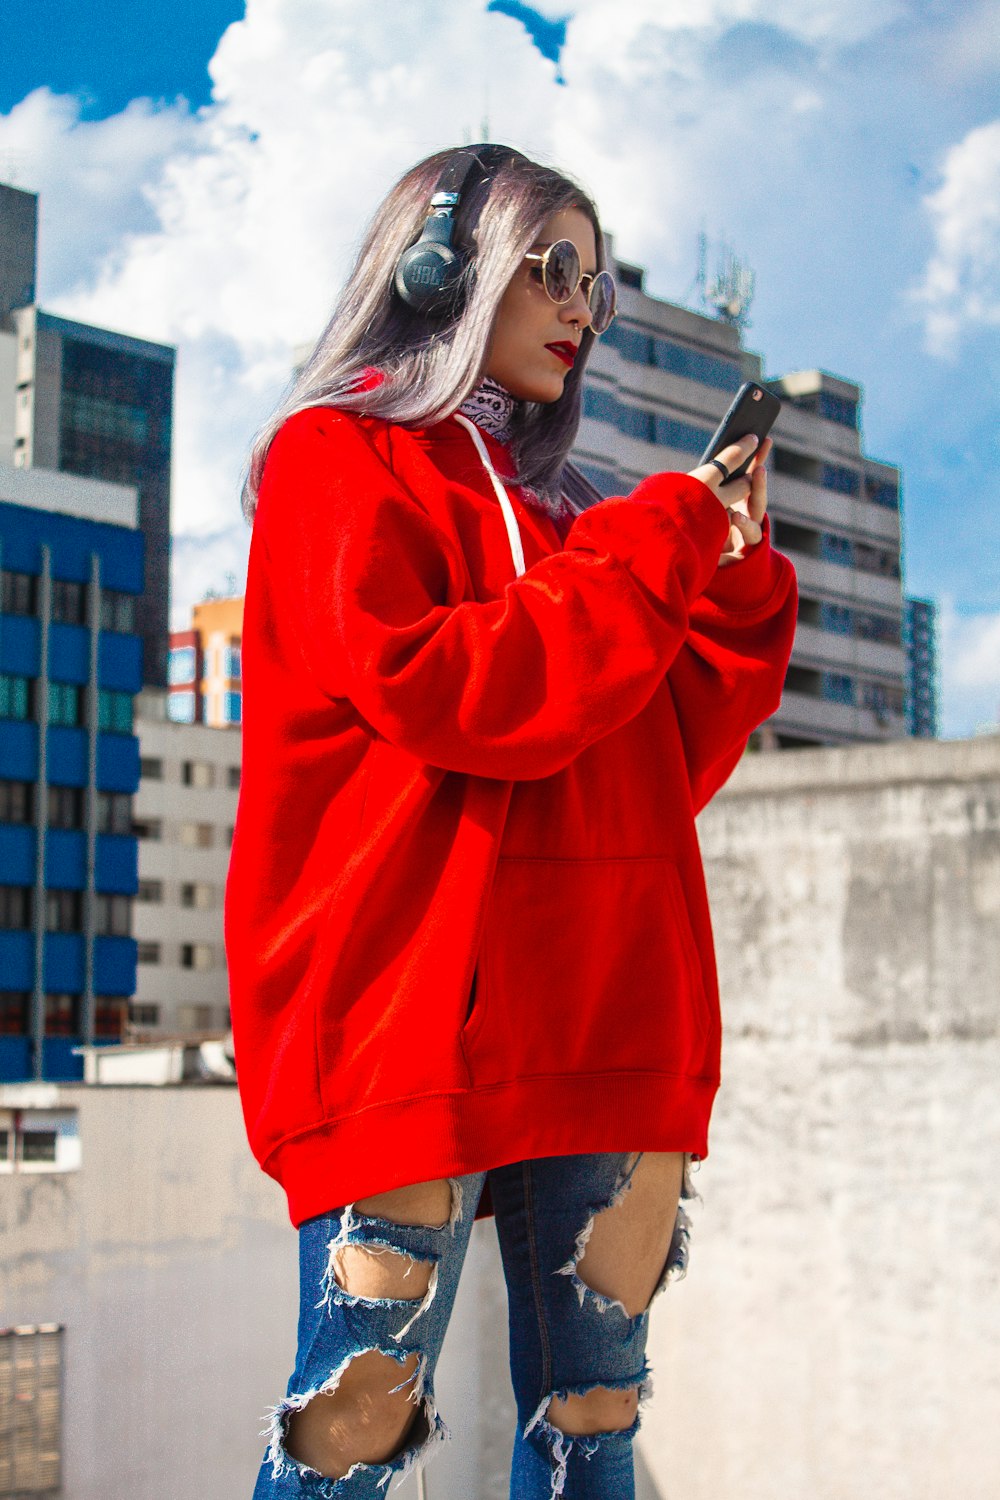 woman in red sweater holding smartphone